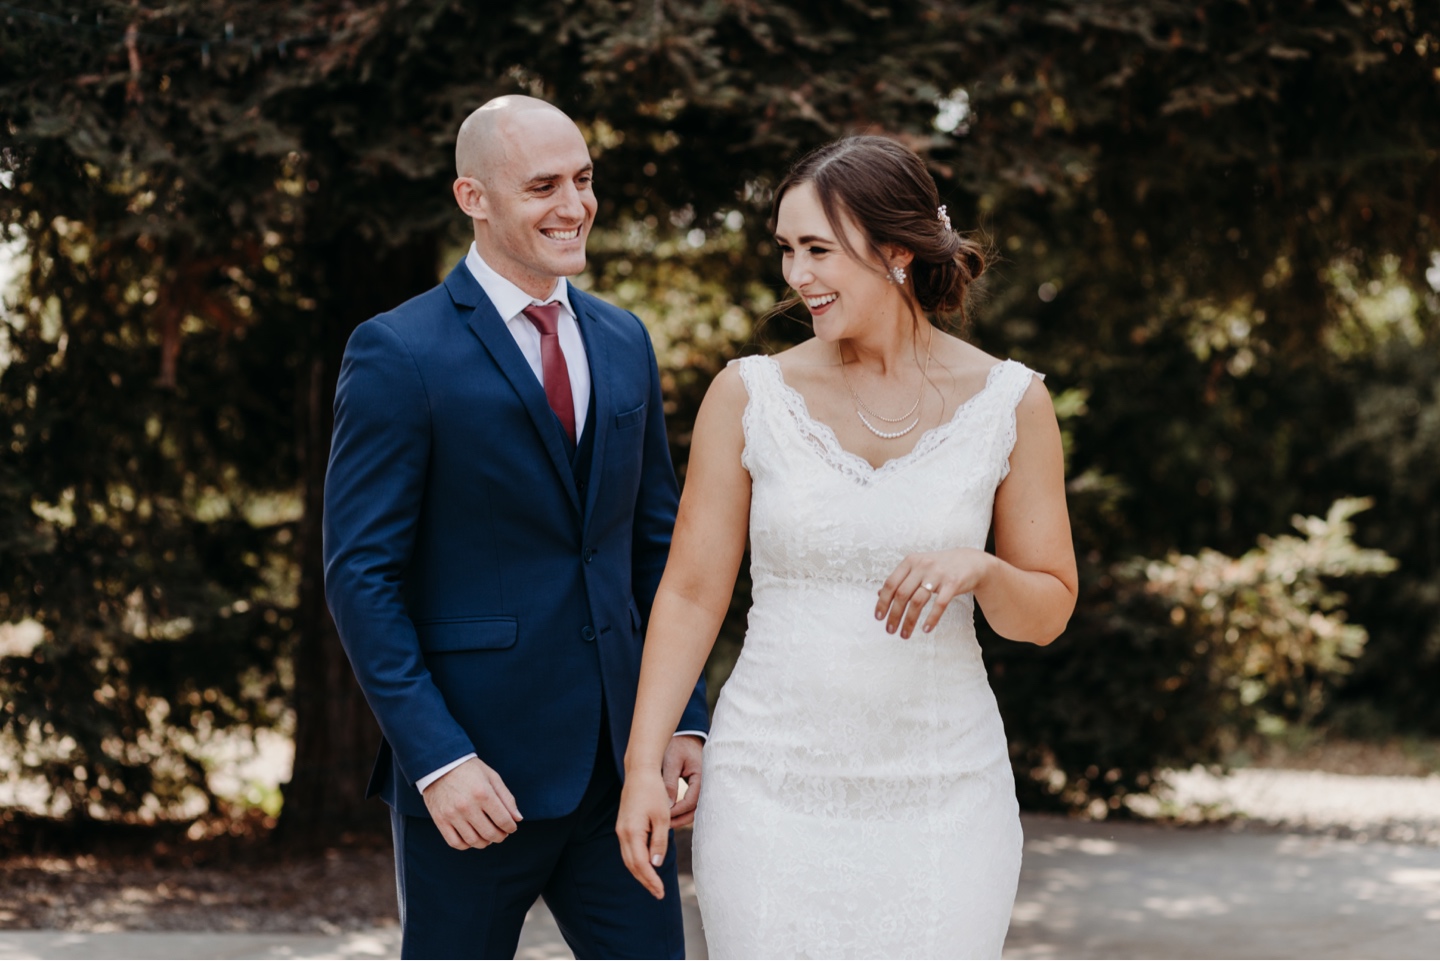 Bride and groom walks up beside his bride as they smile and laugh before their wedding. Wedding photography in Sacramento by Liz Koston.